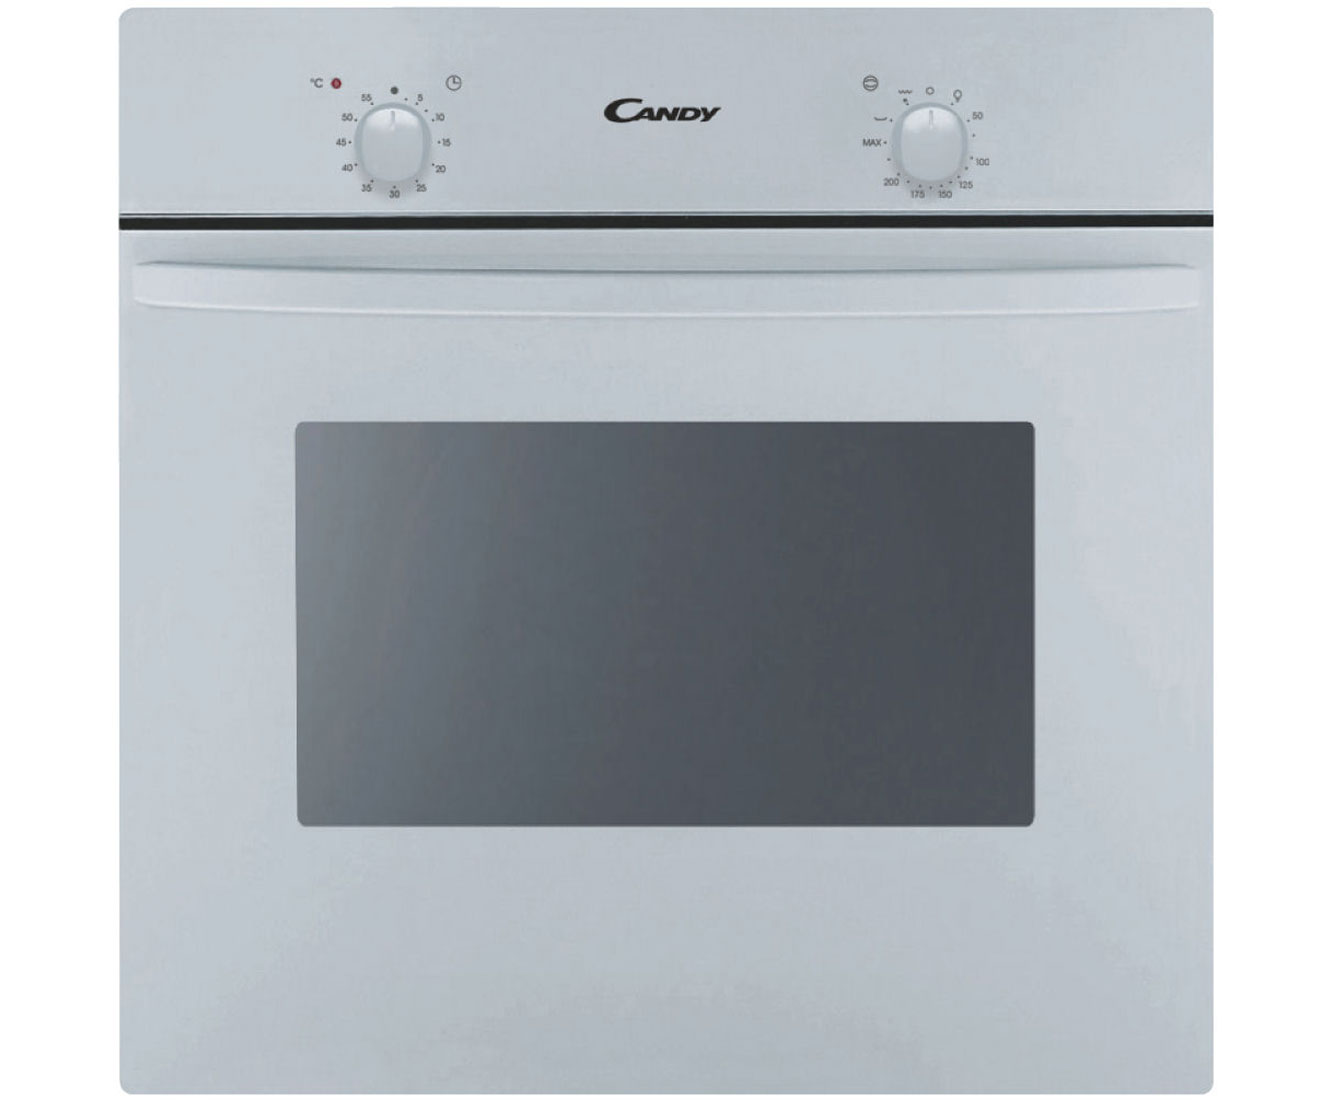 Candy FST201/6W Integrated Single Oven in White